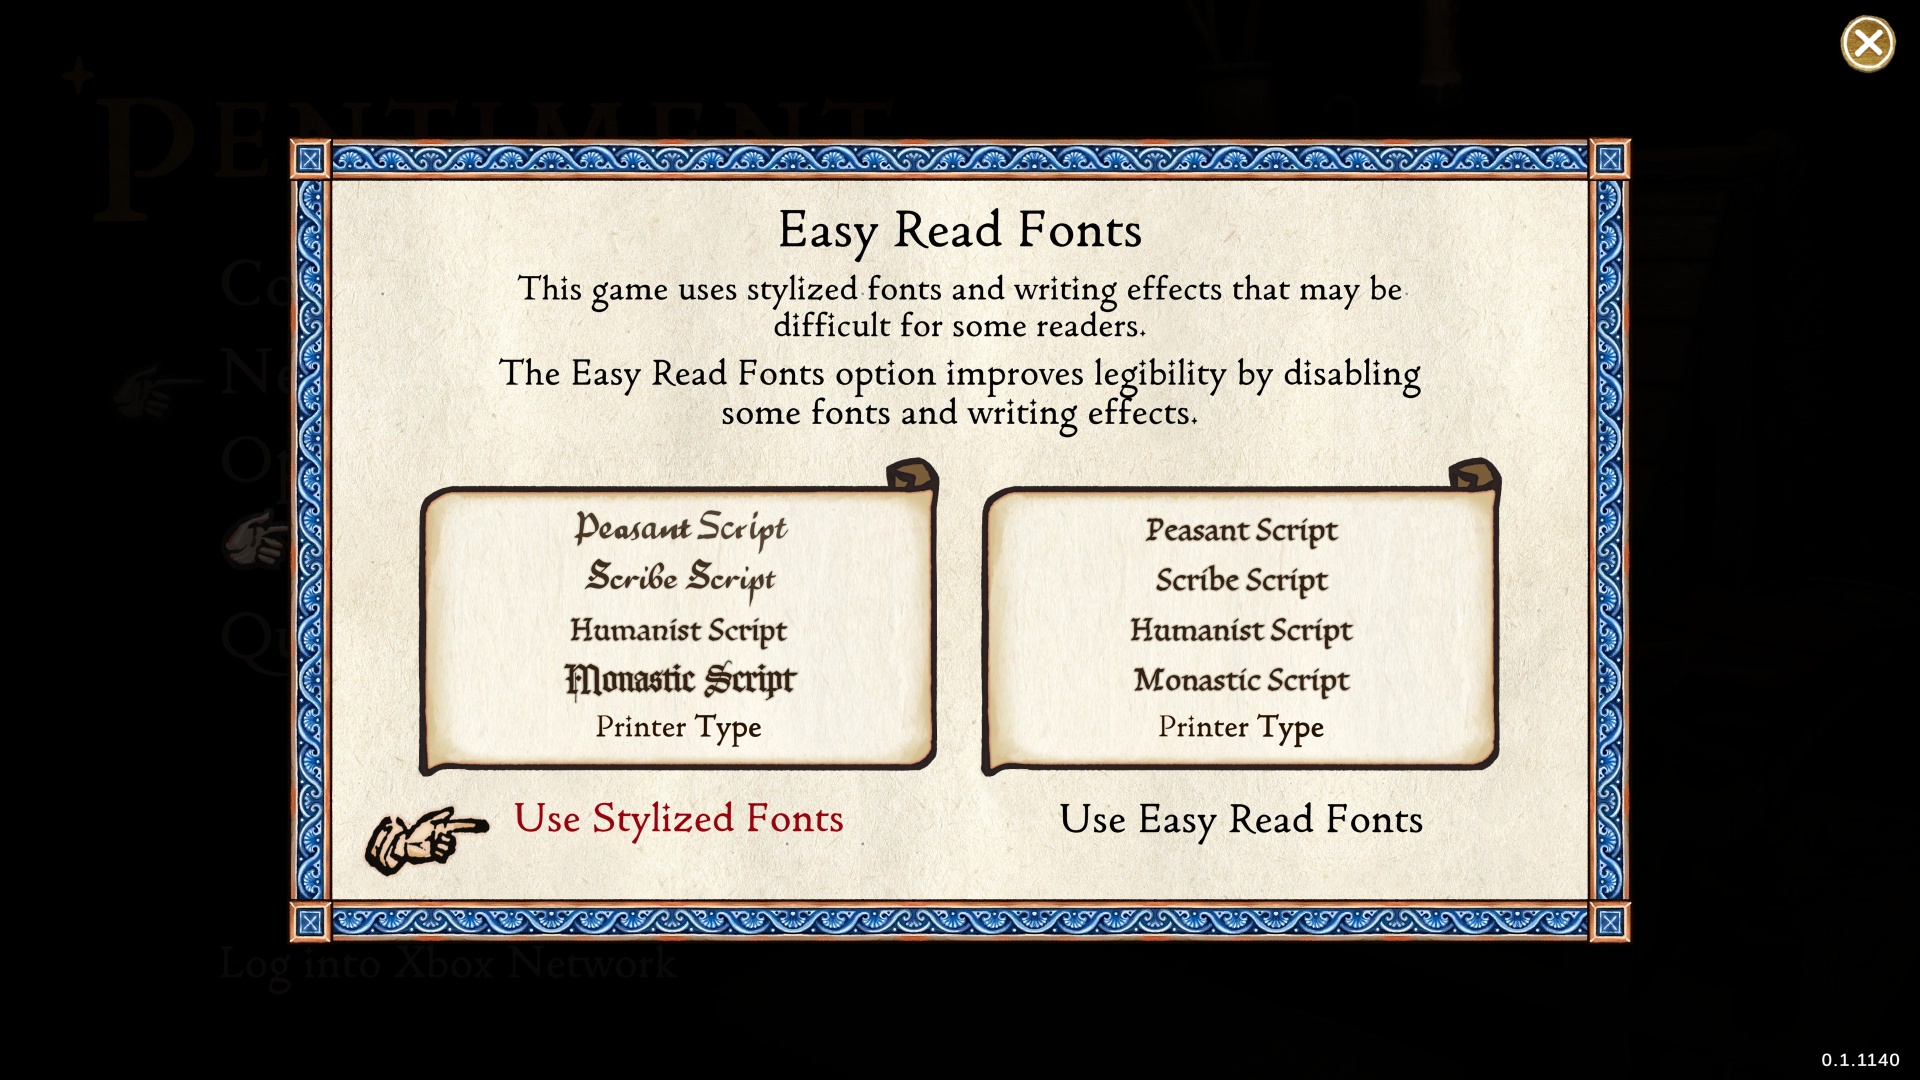 An in-game menu display comparing the “Stylized Fonts” versus “Easy Read Fonts” options in Pentiment.